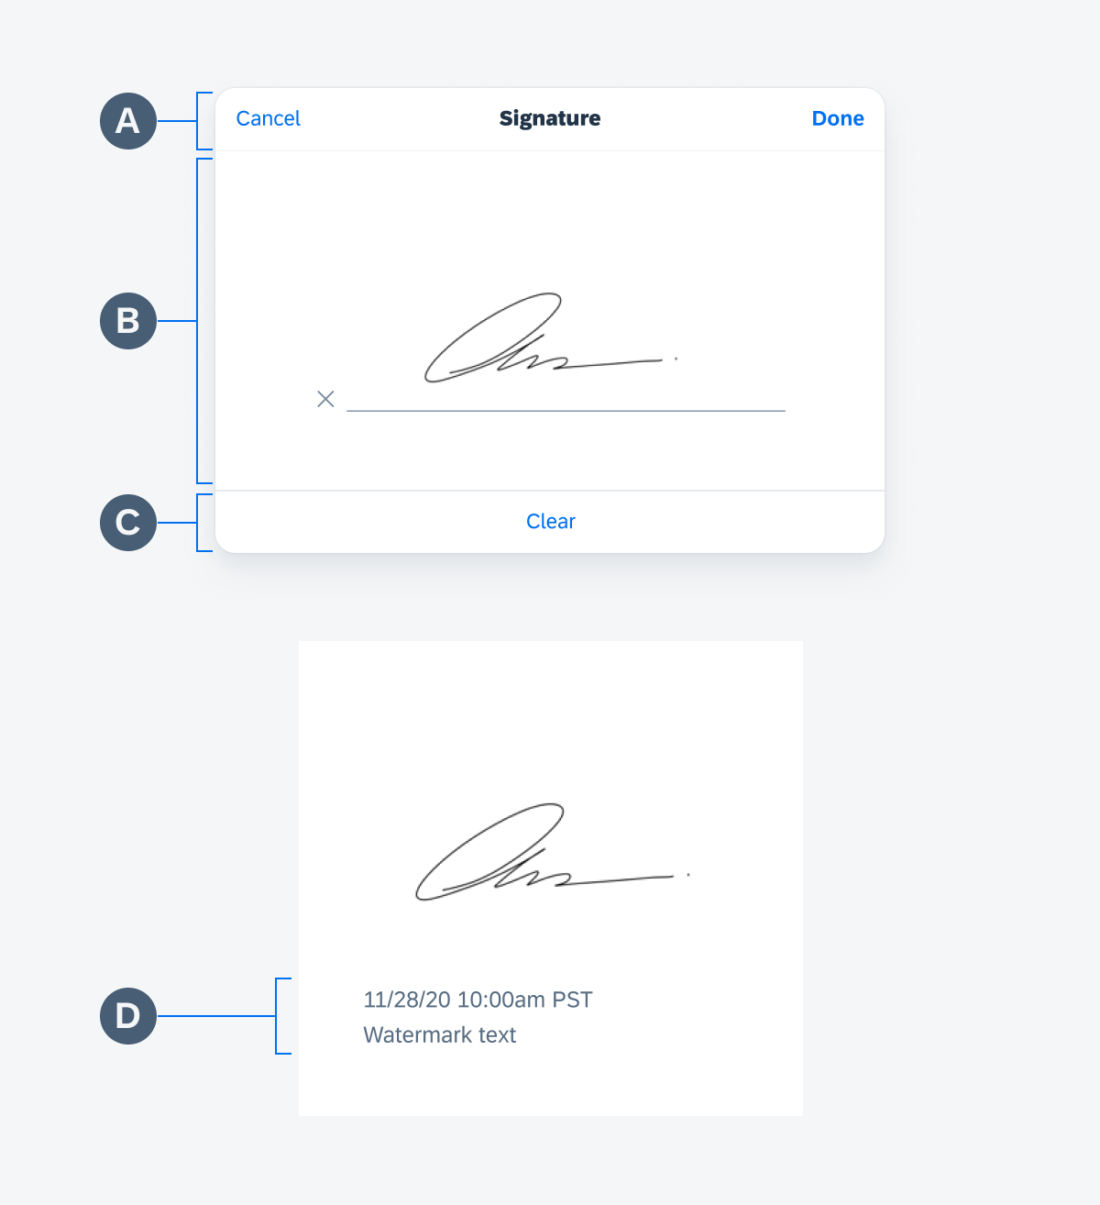 Signature capture modal (top) and saved signature image with a watermark (bottom)